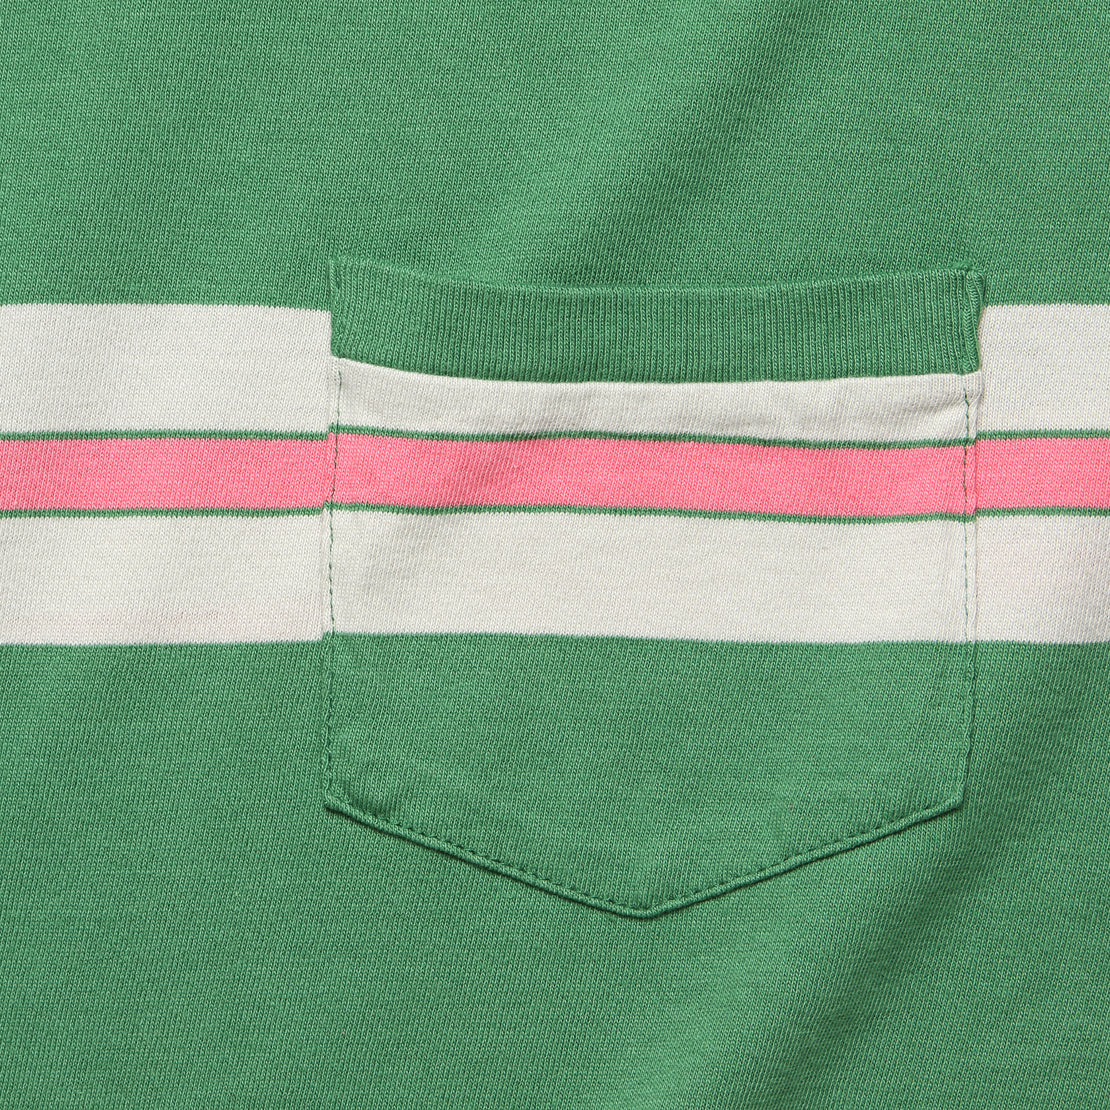 1940s Split Hem Tee - Watermelon Pink/Green/Cream - Levis Vintage Clothing - STAG Provisions - Tops - S/S Tee